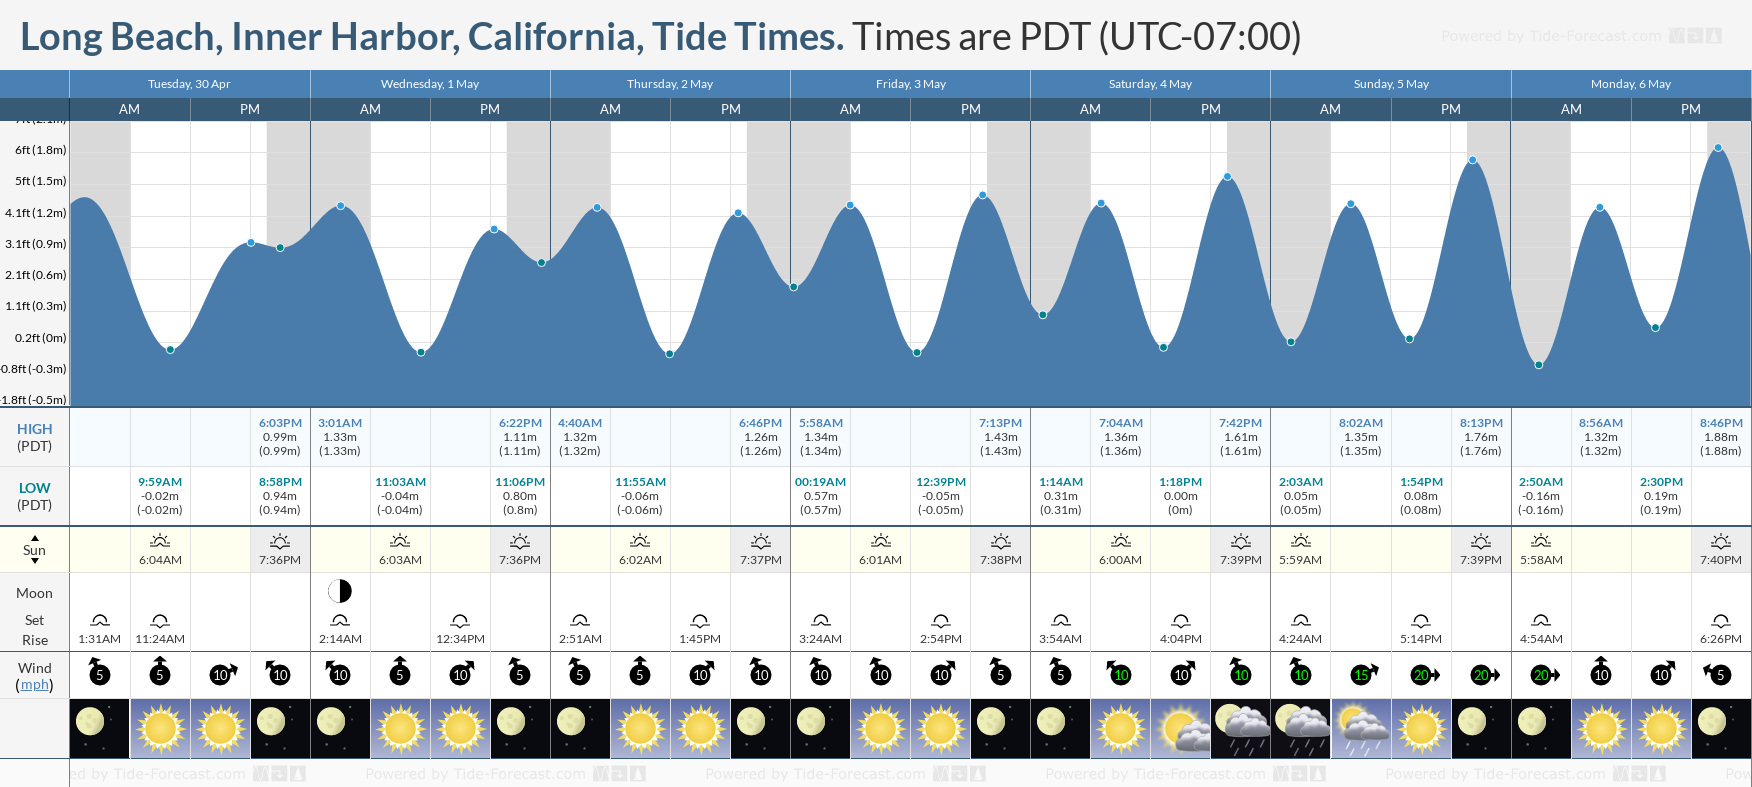 Long Beach, Inner Harbor, California Tide Chart including high and low tide times for the next 7 days